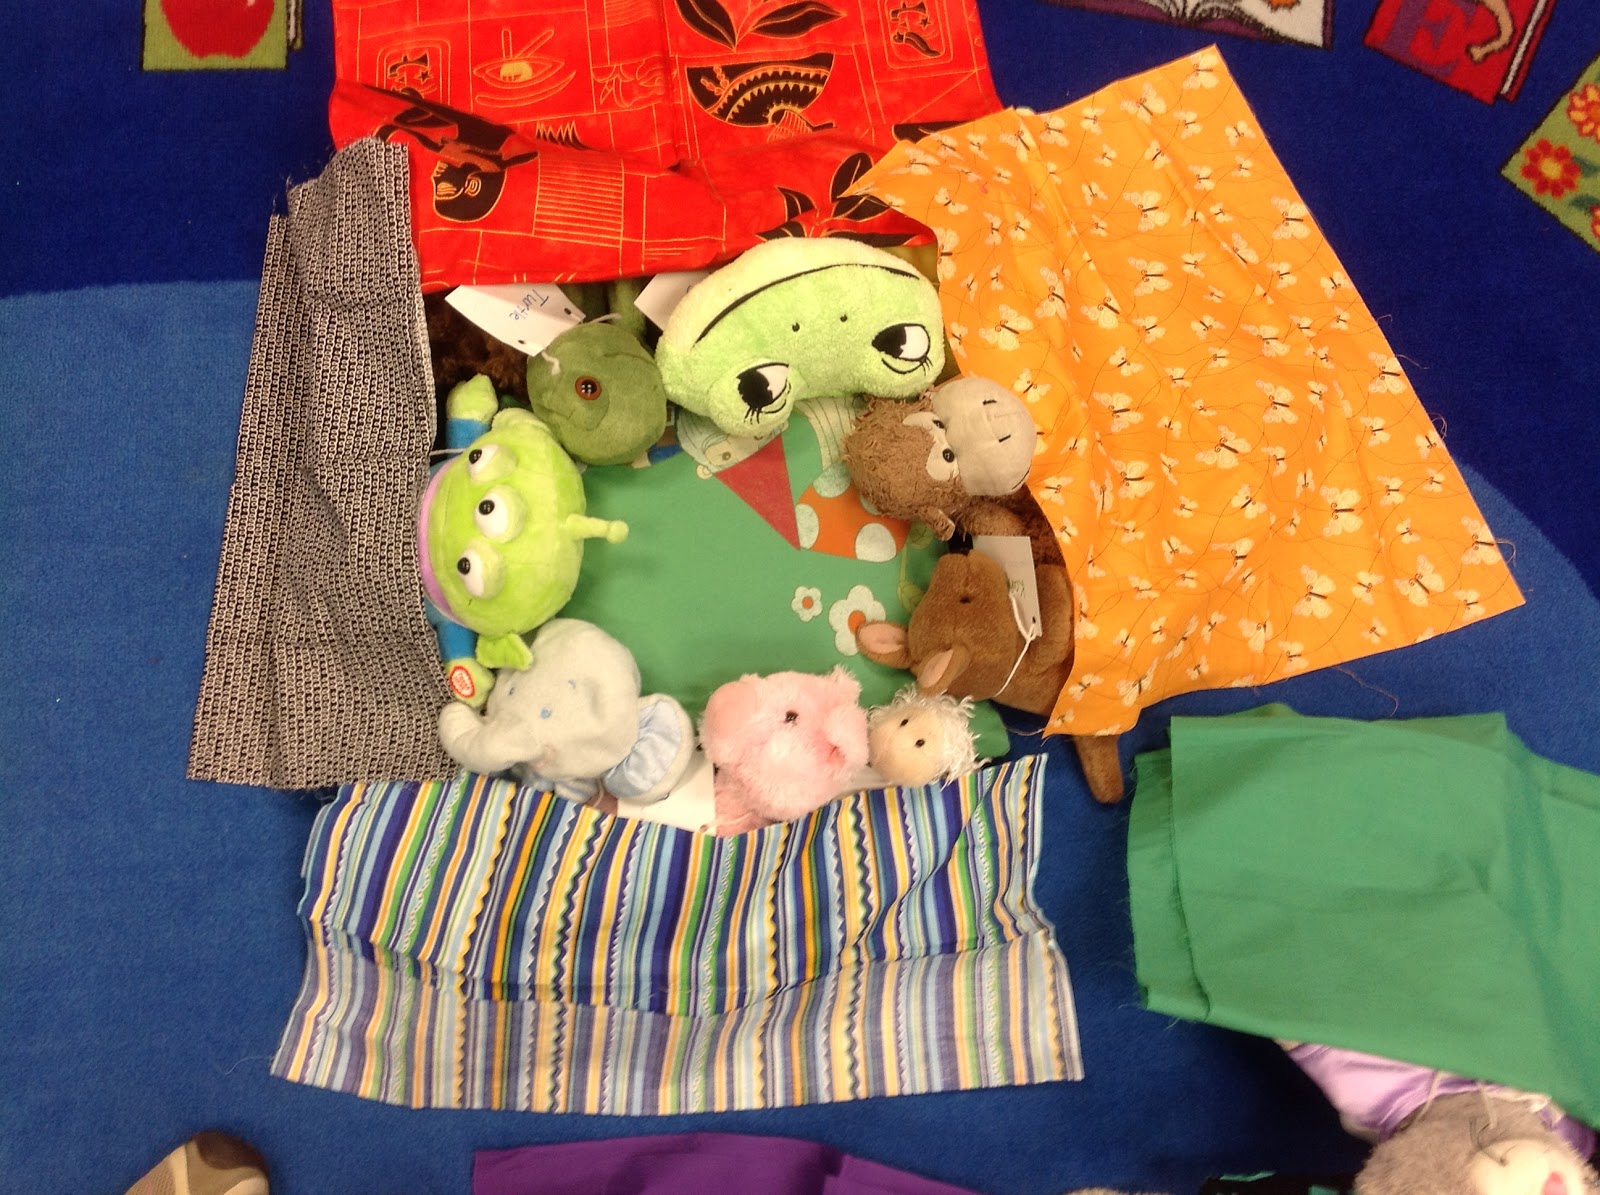 Stuffed animals under a blanket having a sleepover at the library.